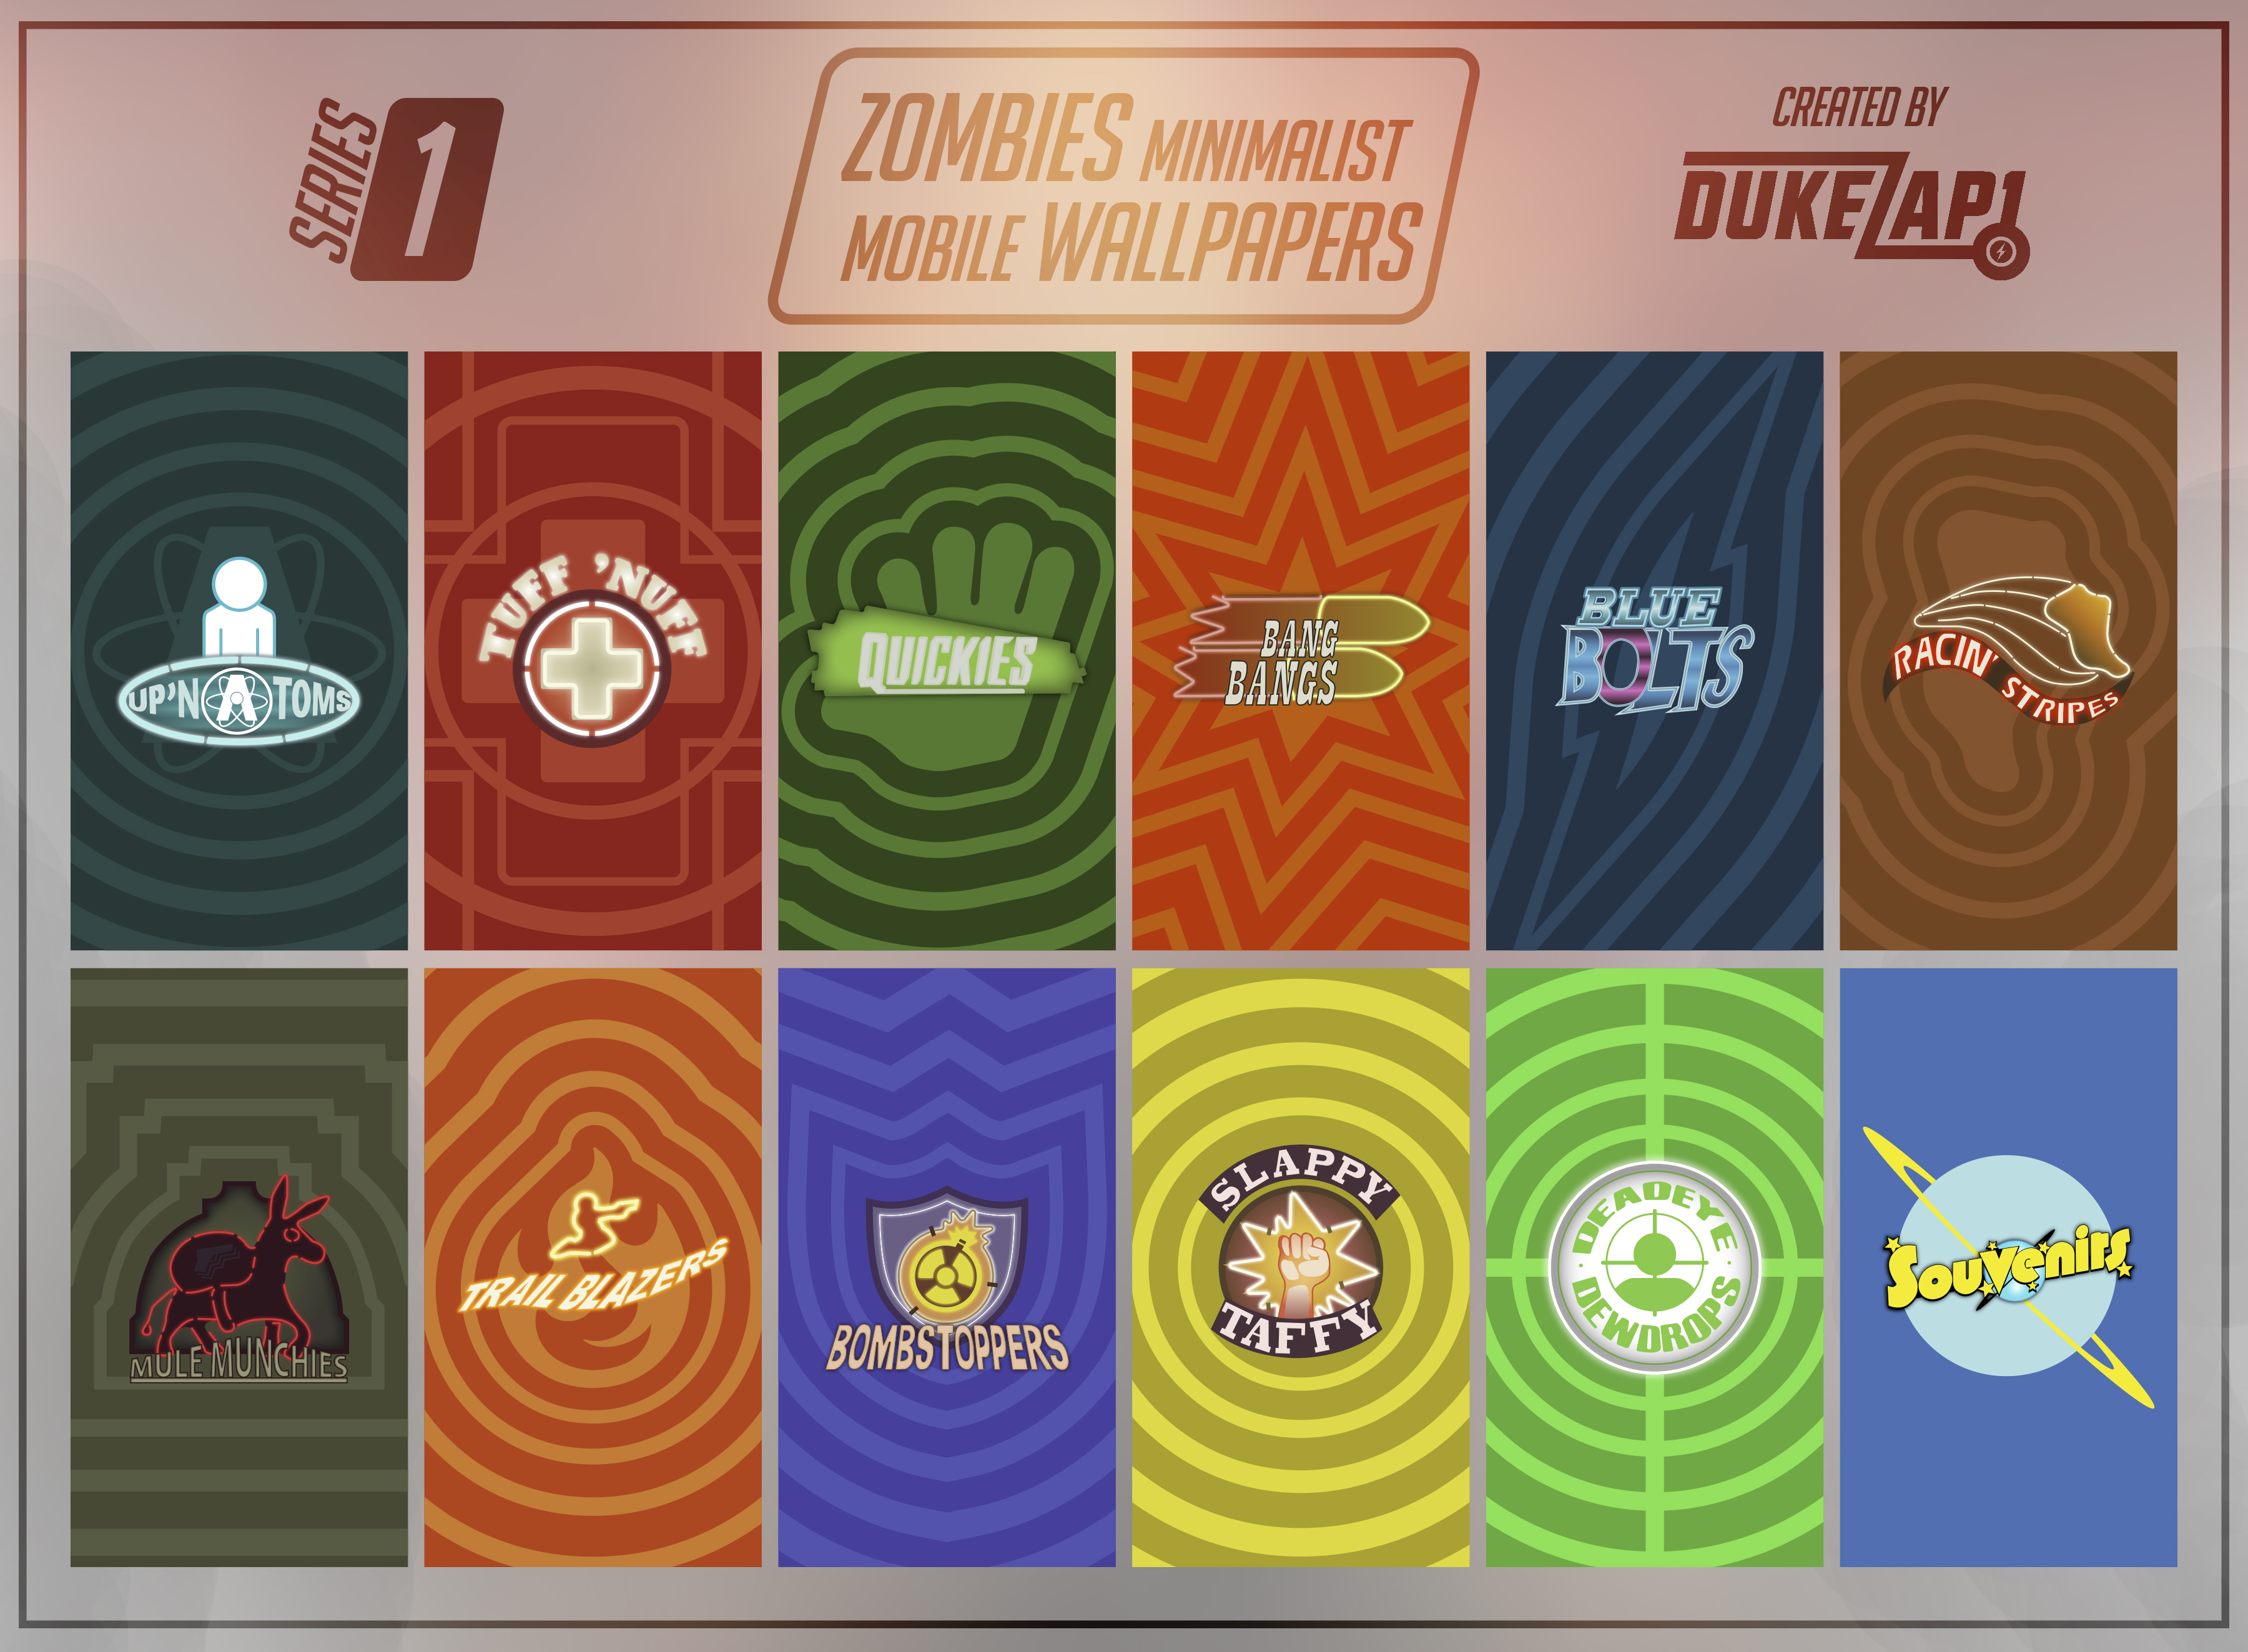 Zombies Mobile Wallpaper [Chronicles Celebration] Downloads!